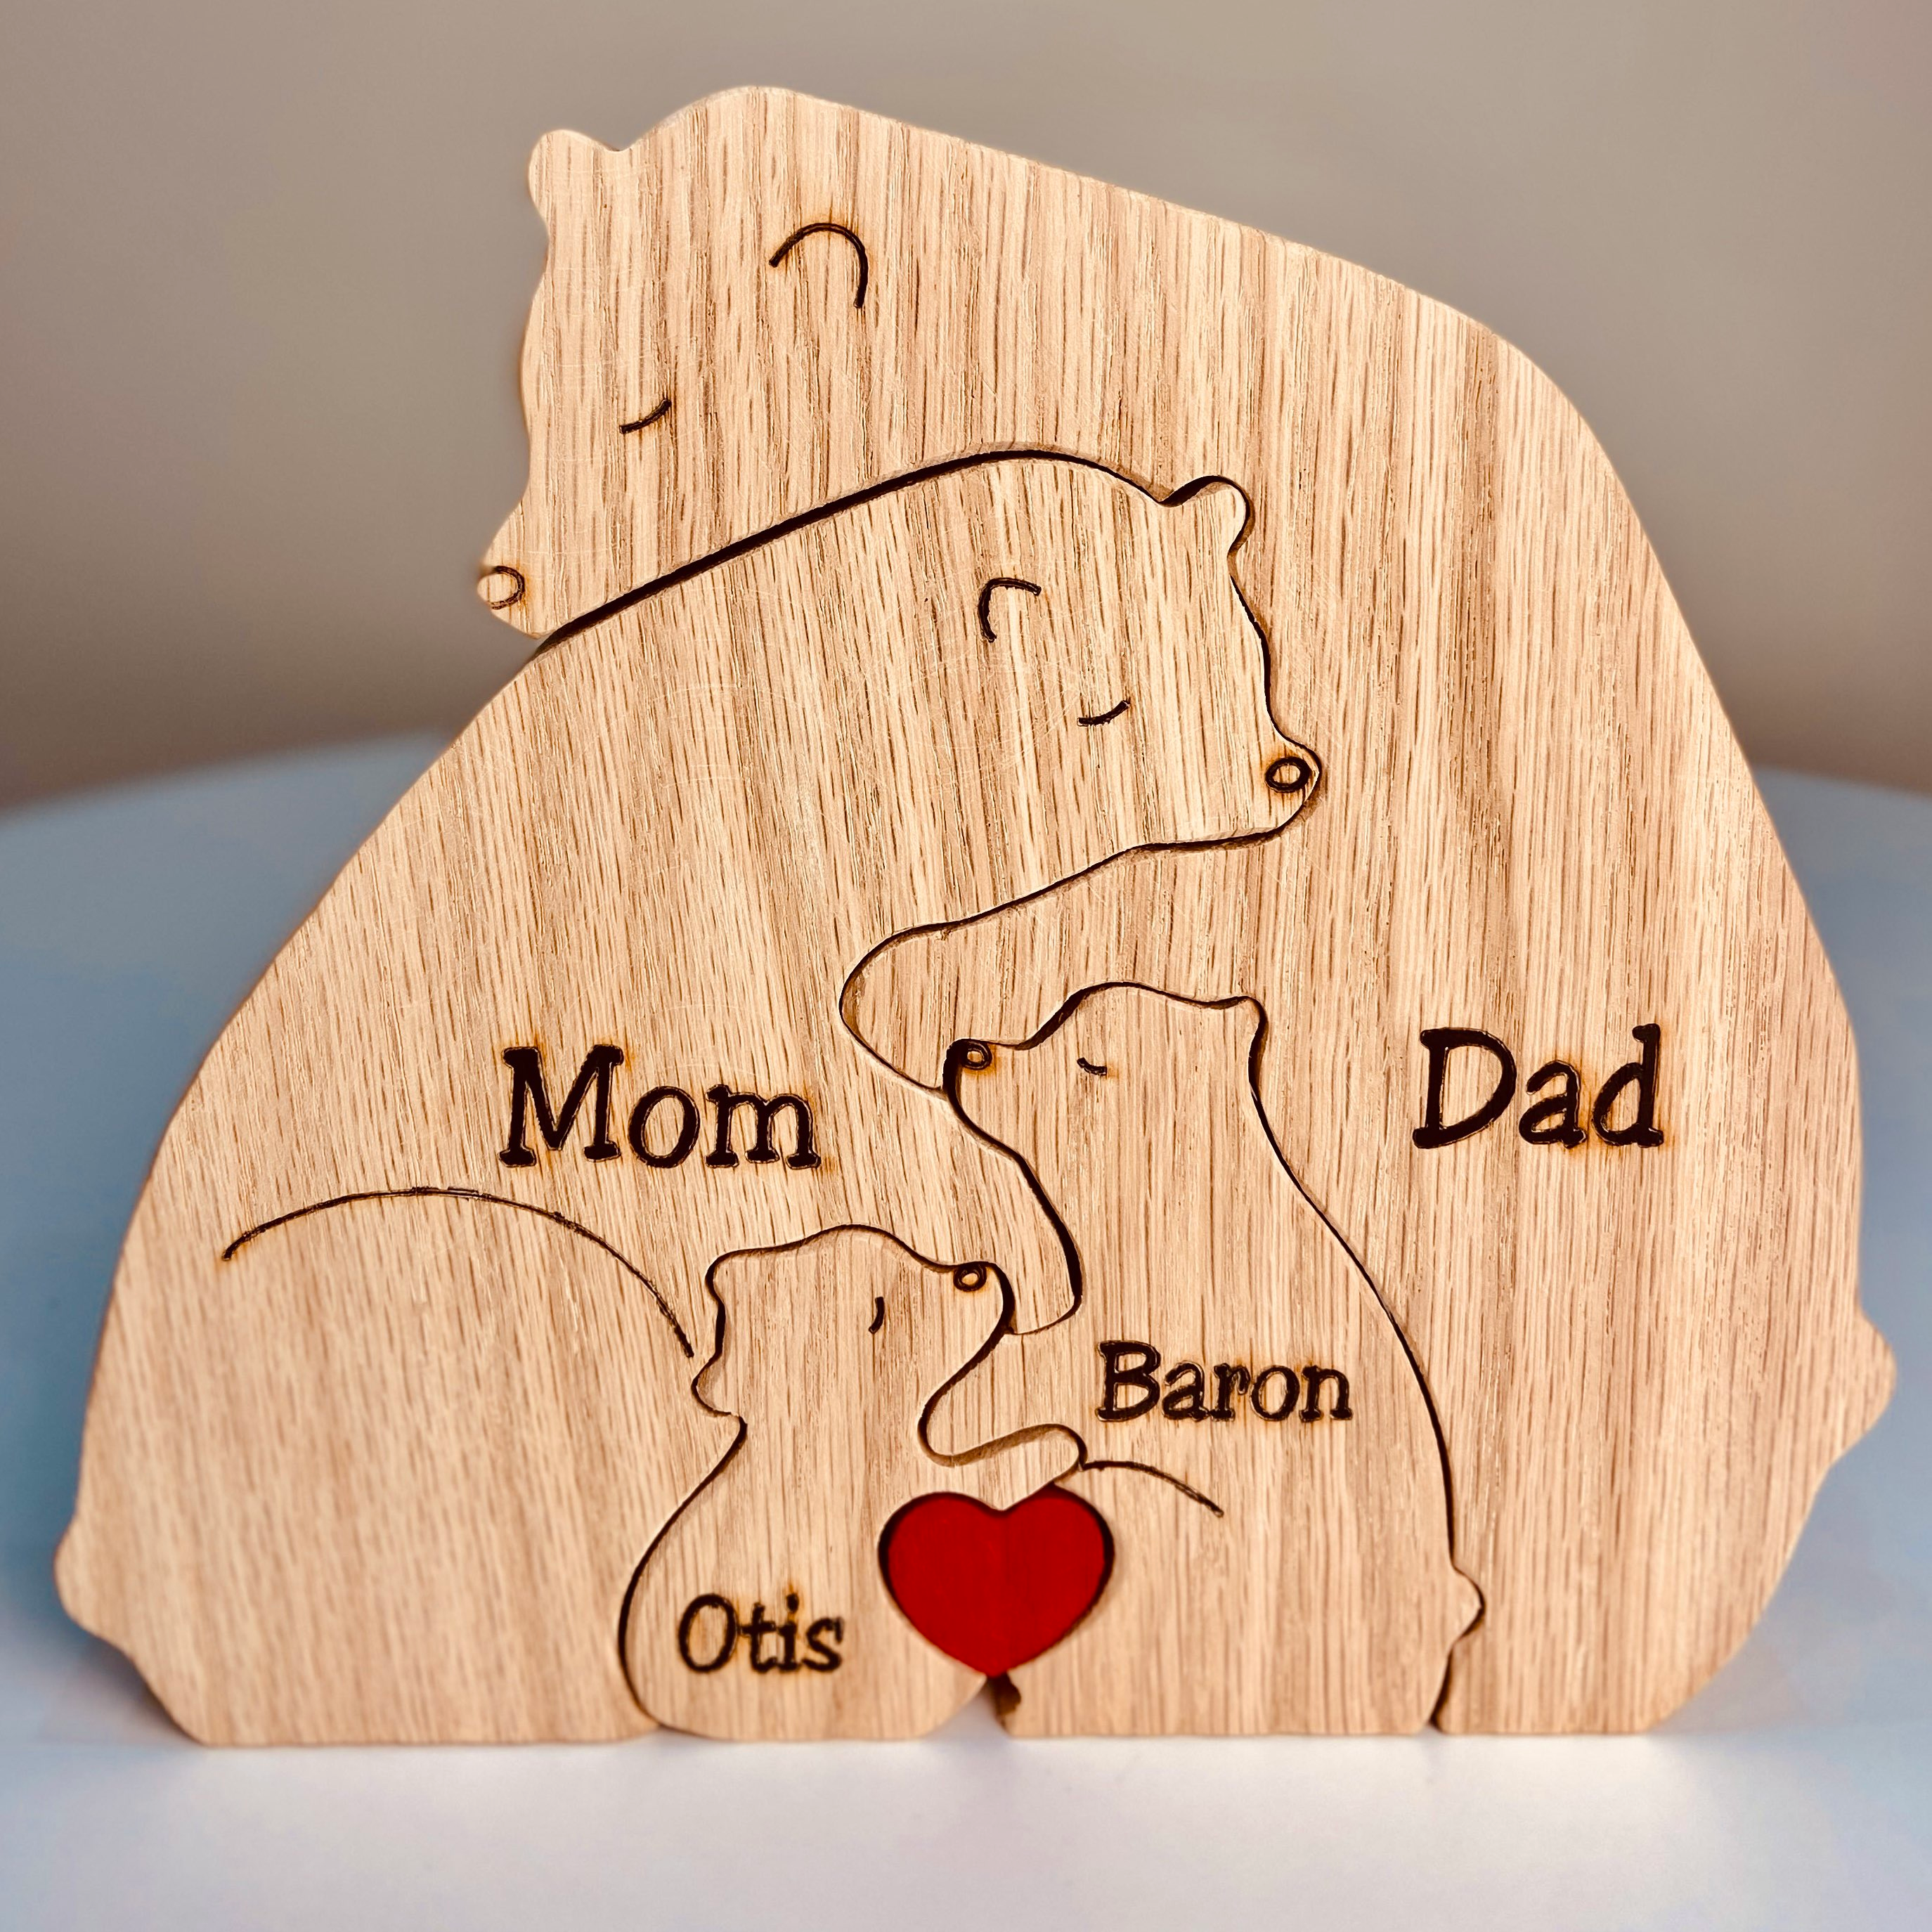 Couple with One Kid Wood Sculpture, Couple Wooden Carving Gifts